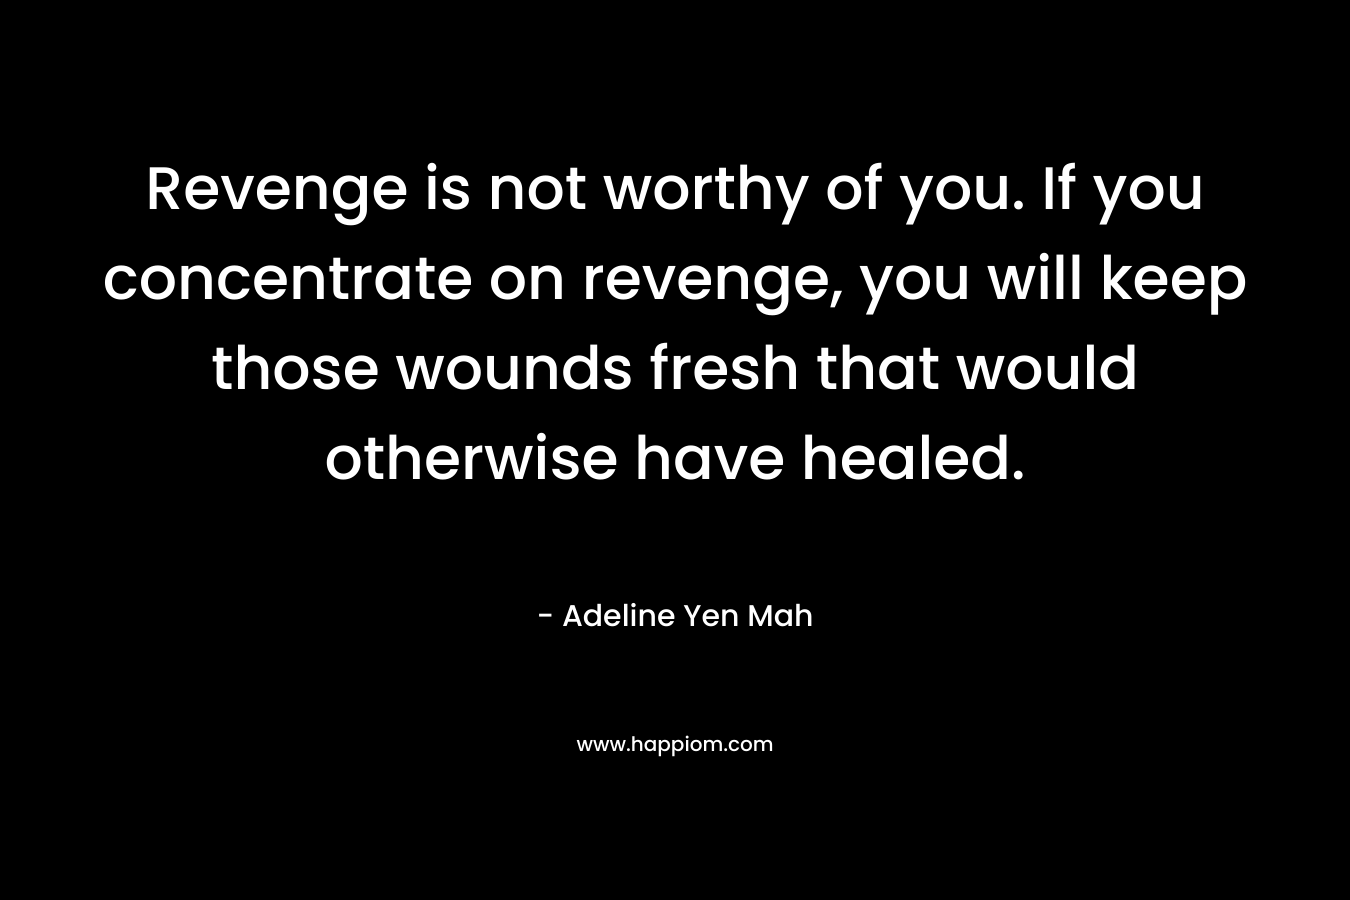 Revenge is not worthy of you. If you concentrate on revenge, you will keep those wounds fresh that would otherwise have healed. – Adeline Yen Mah